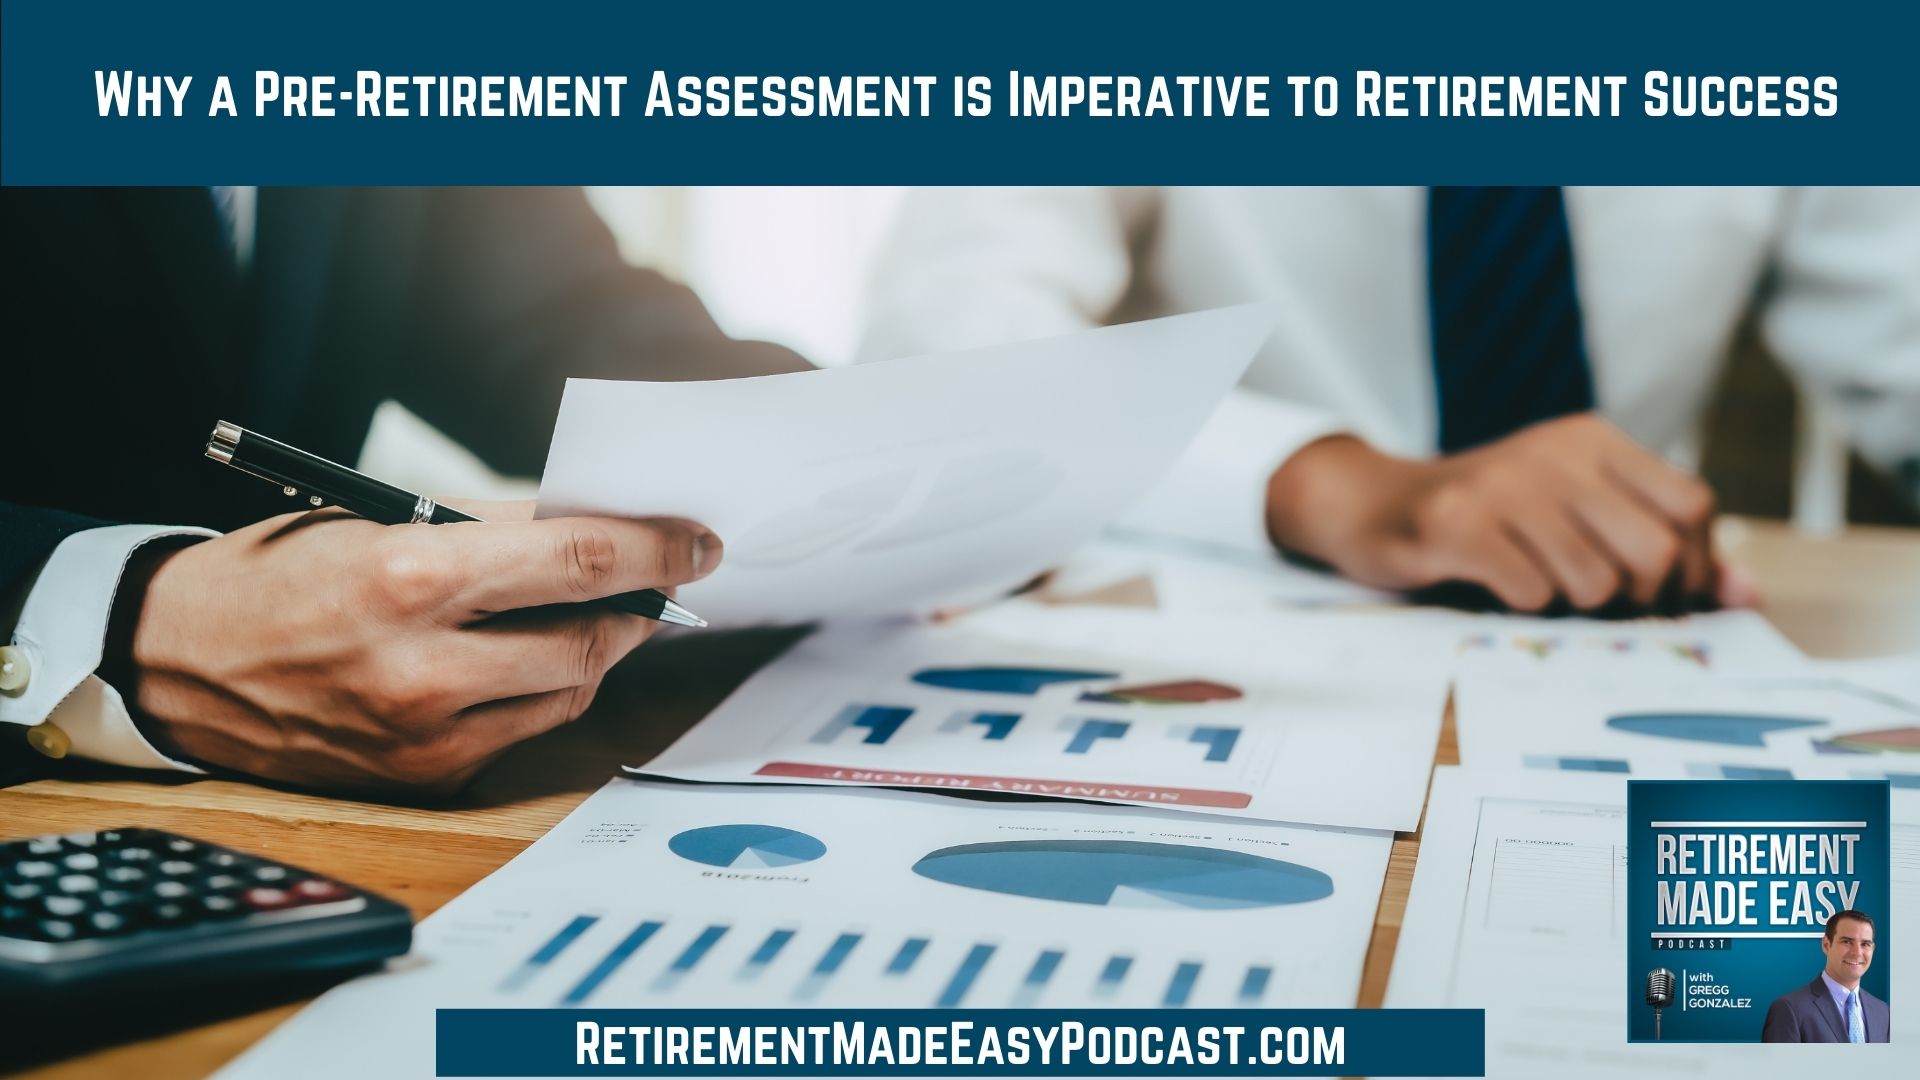 Why a Pre-Retirement Assessment is Imperative